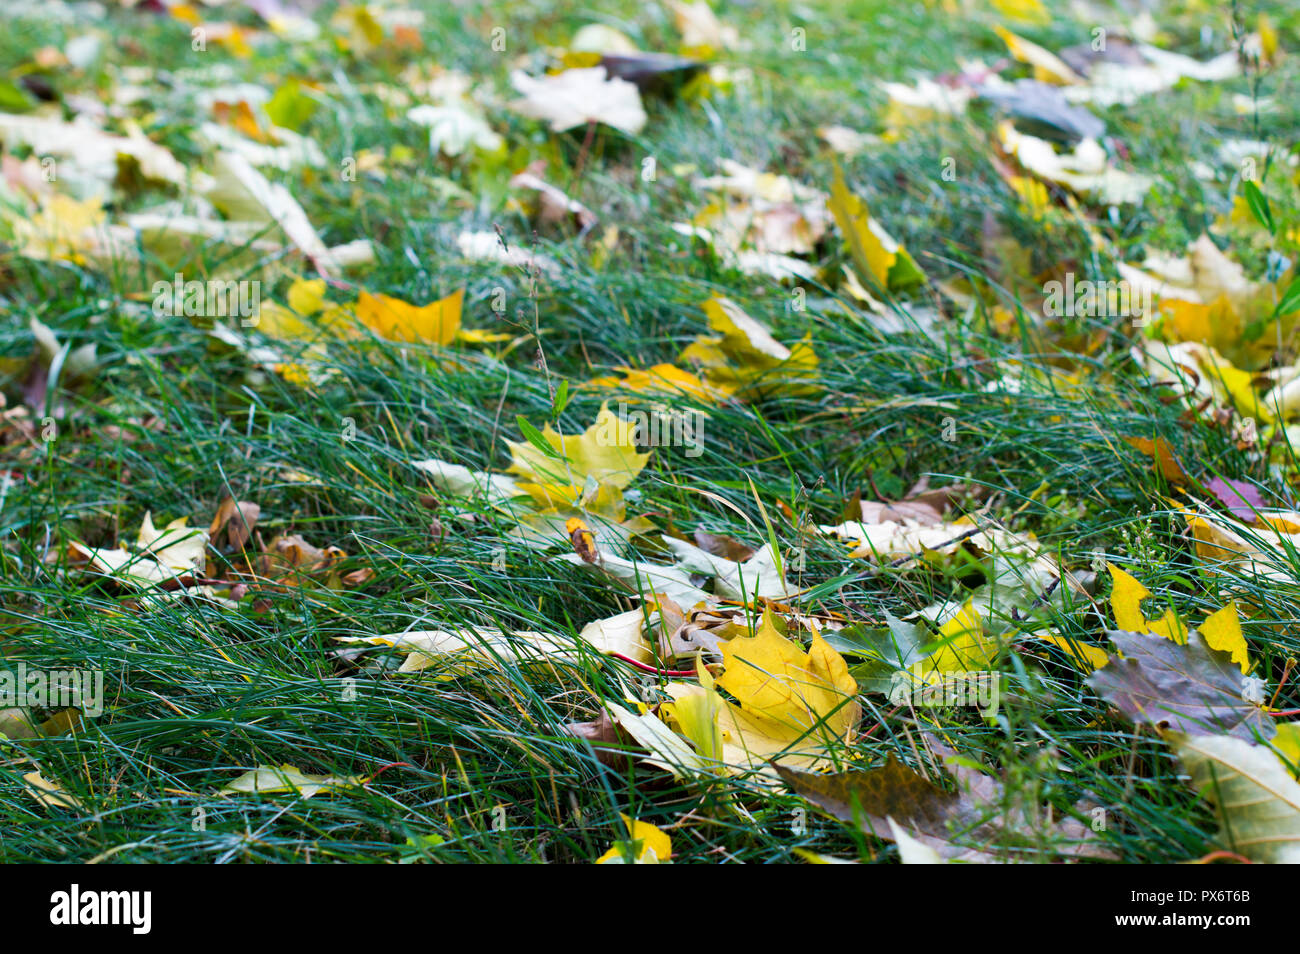 Colorful fallen autumn leaves, background on the ground. Russia Stock Photo